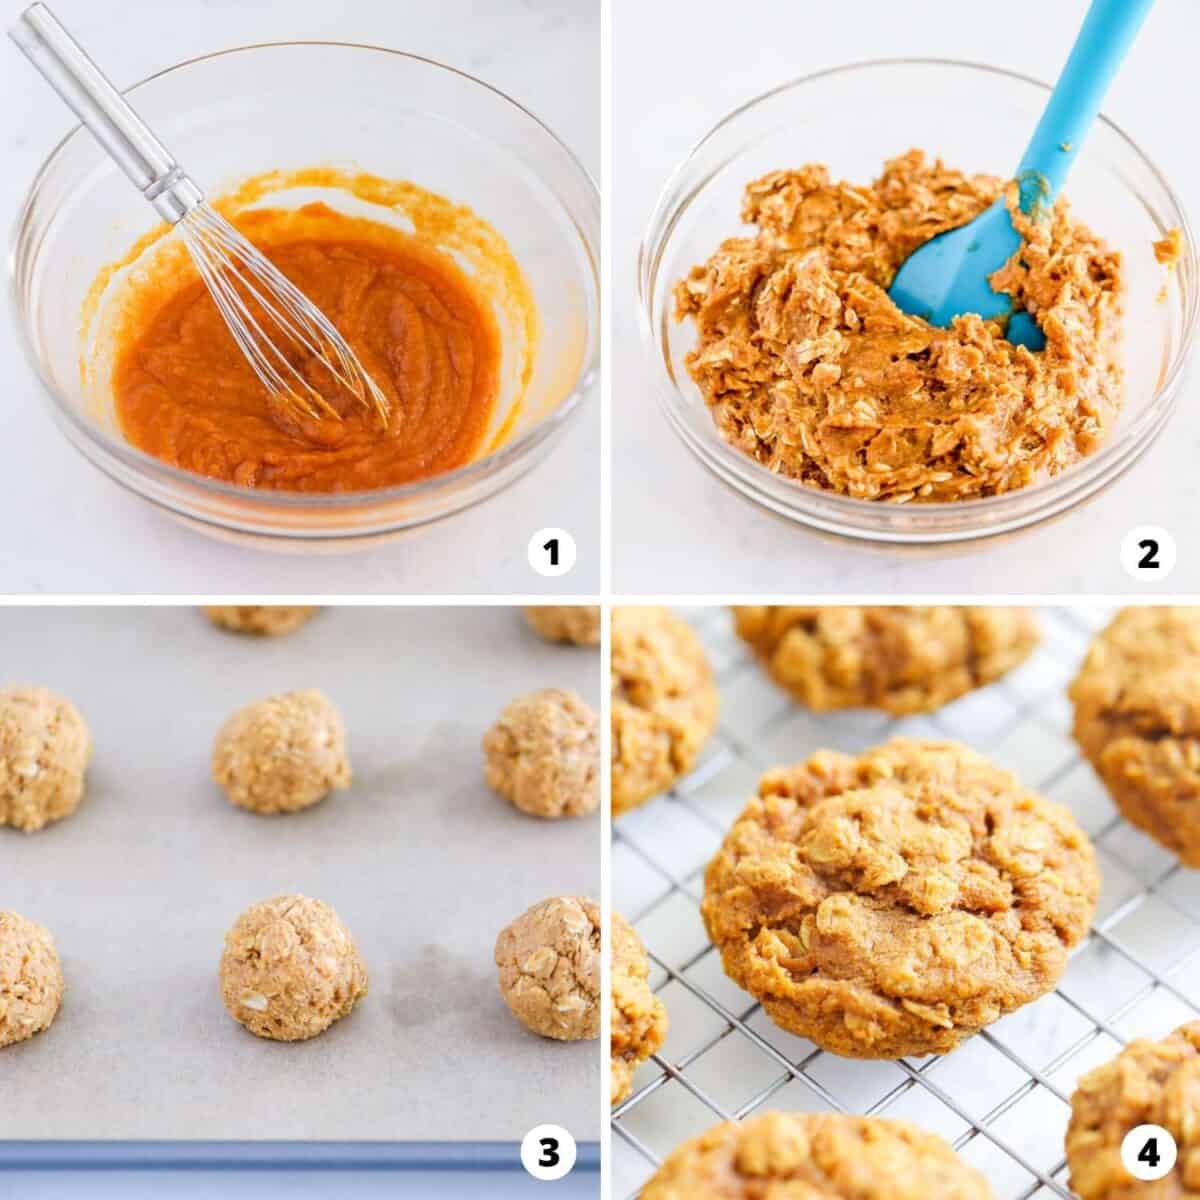 The process of showing how to make pumpkin oatmeal cookies in a 4 step collage.